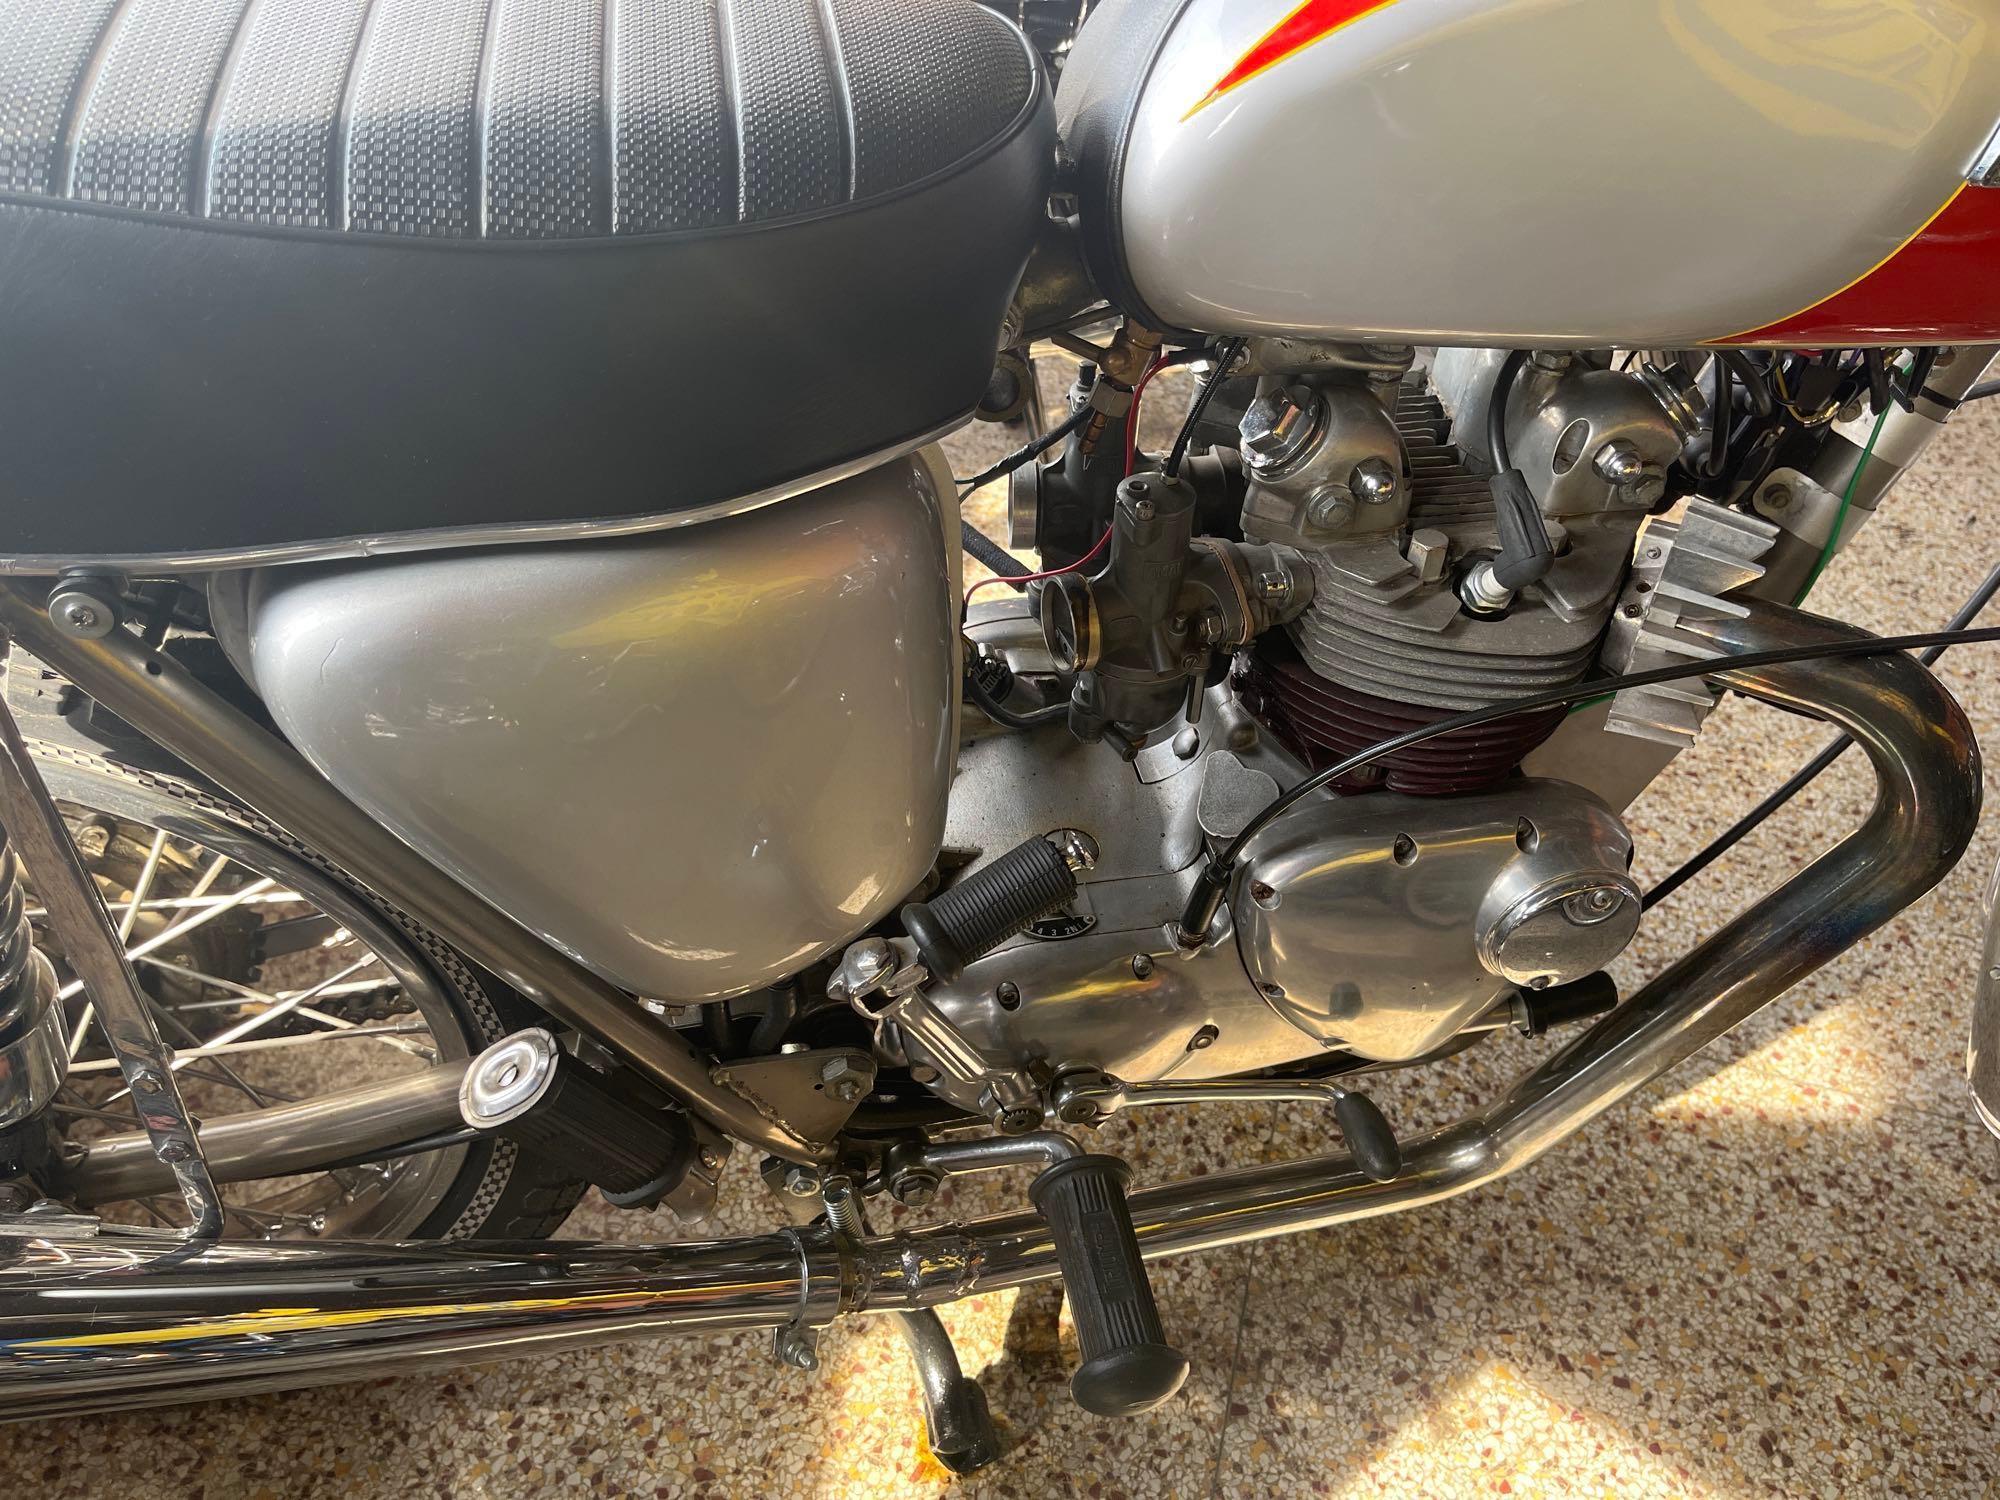 1971 Triumph T100 with title